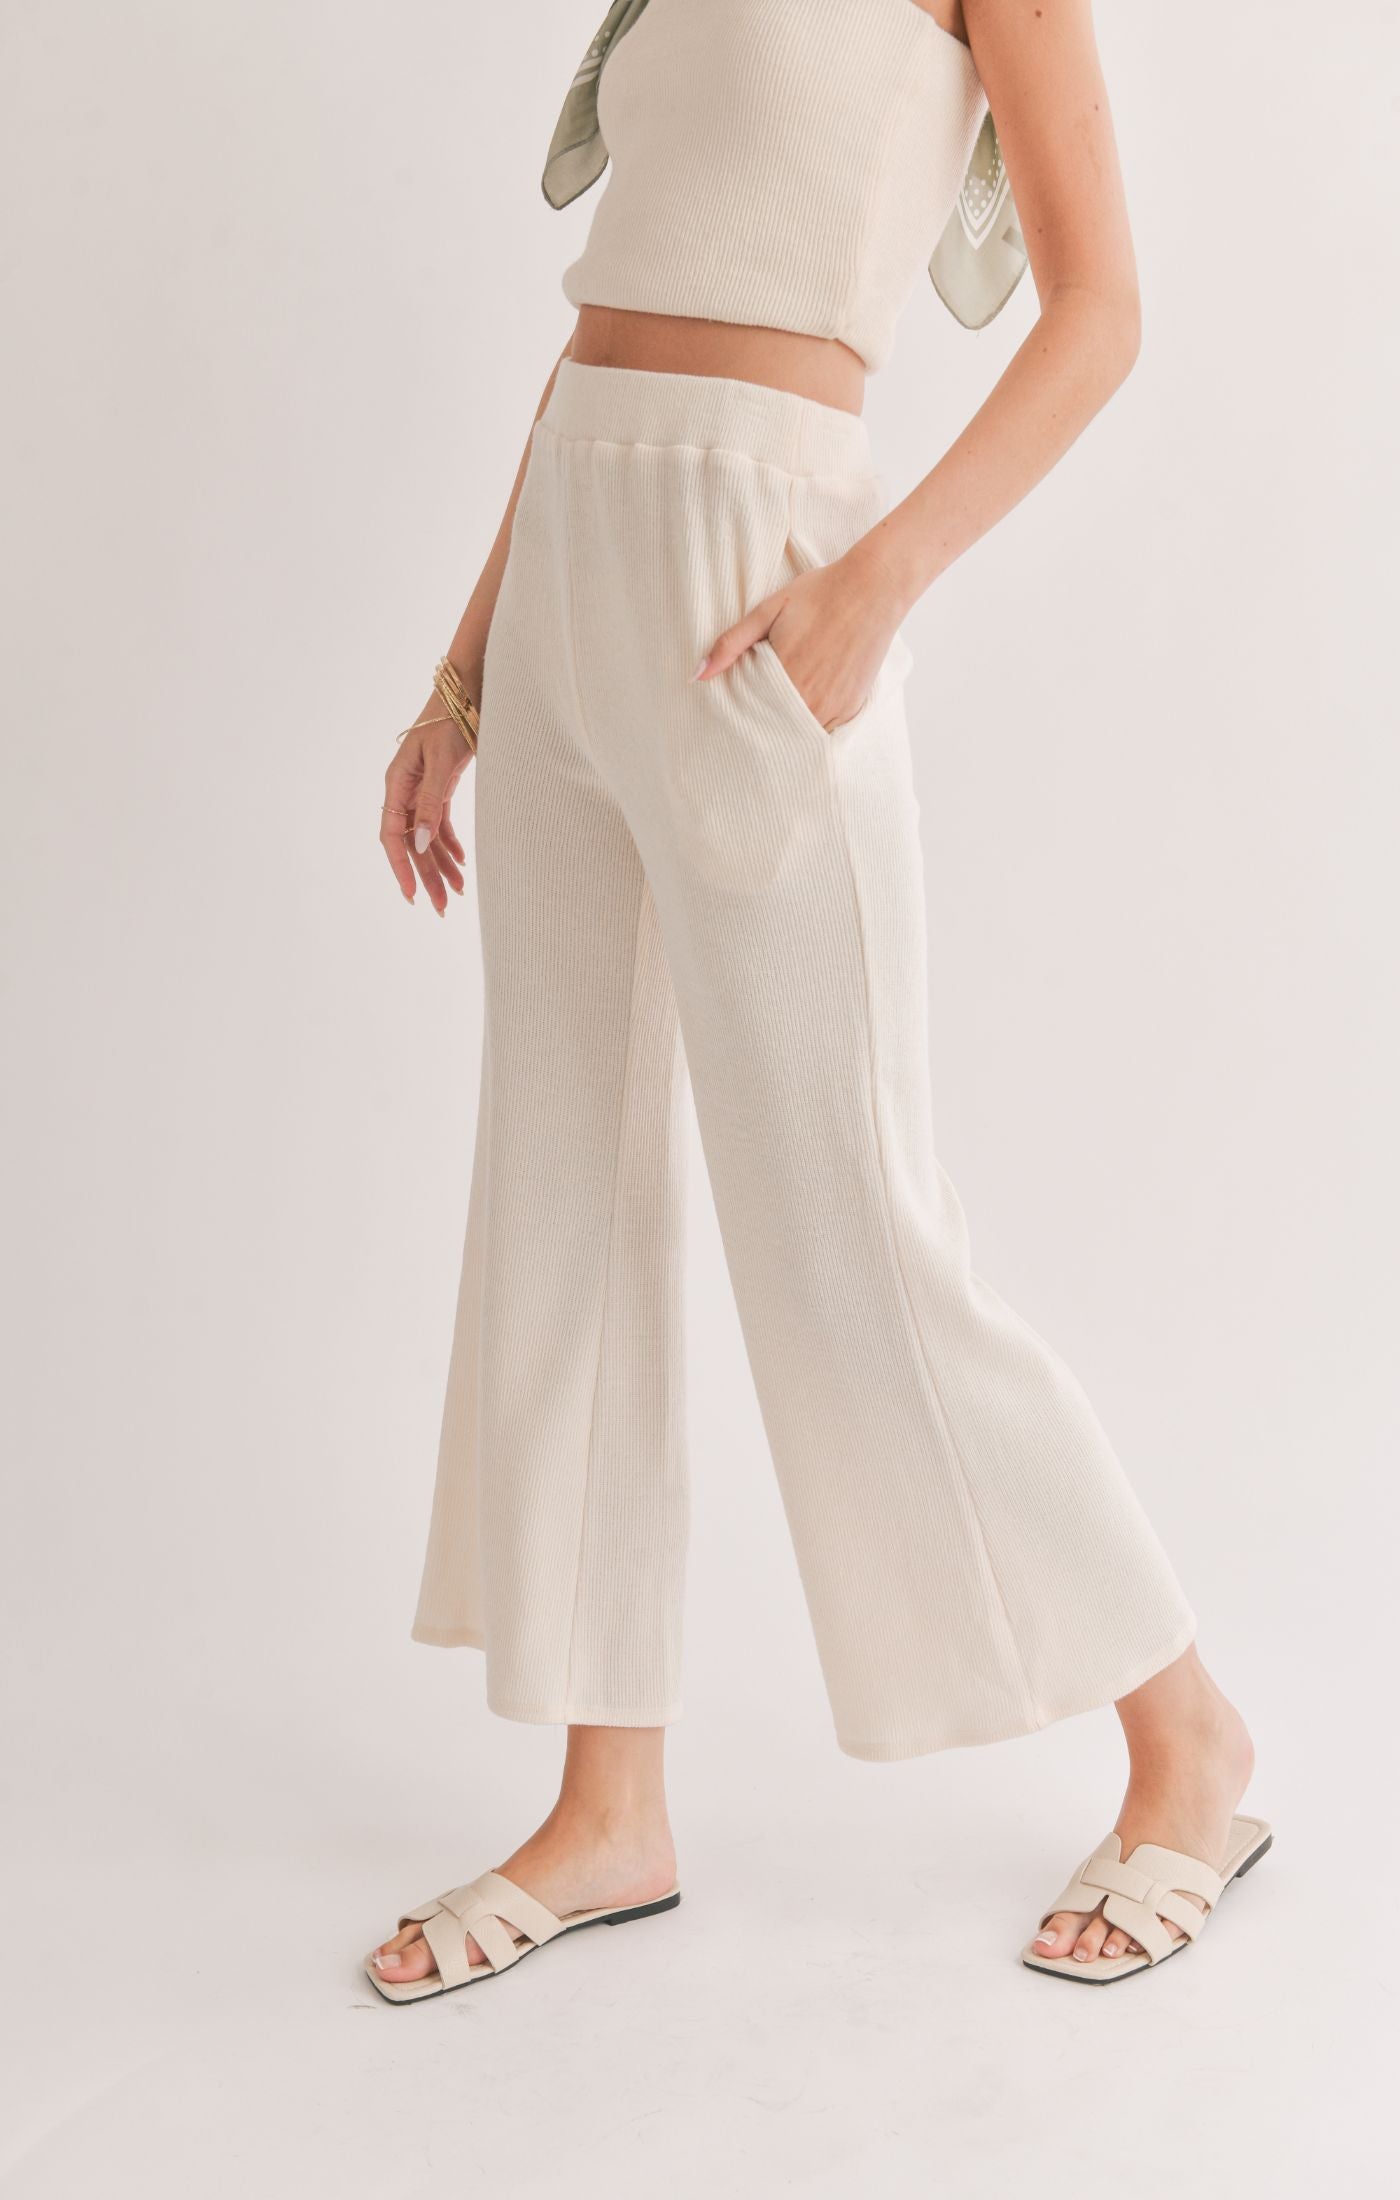 SAGE THE LABEL-"EASILY"CULOTTE